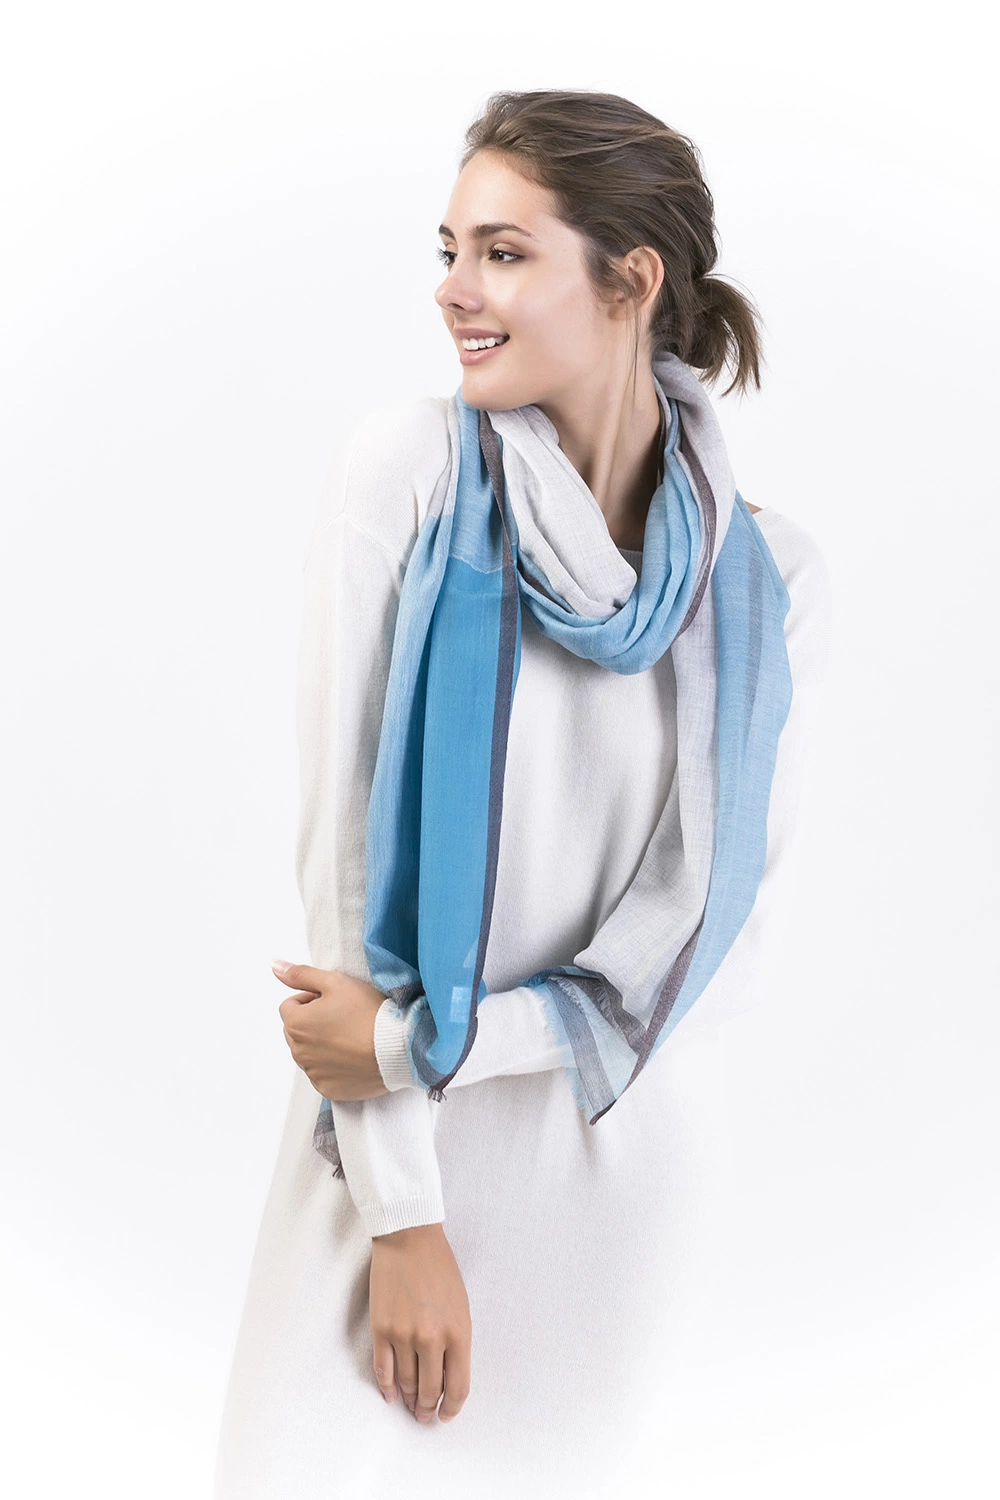 New Arrival Wool & Cashmere Blended Plaid Women Scarf with Water Soluble Yarns